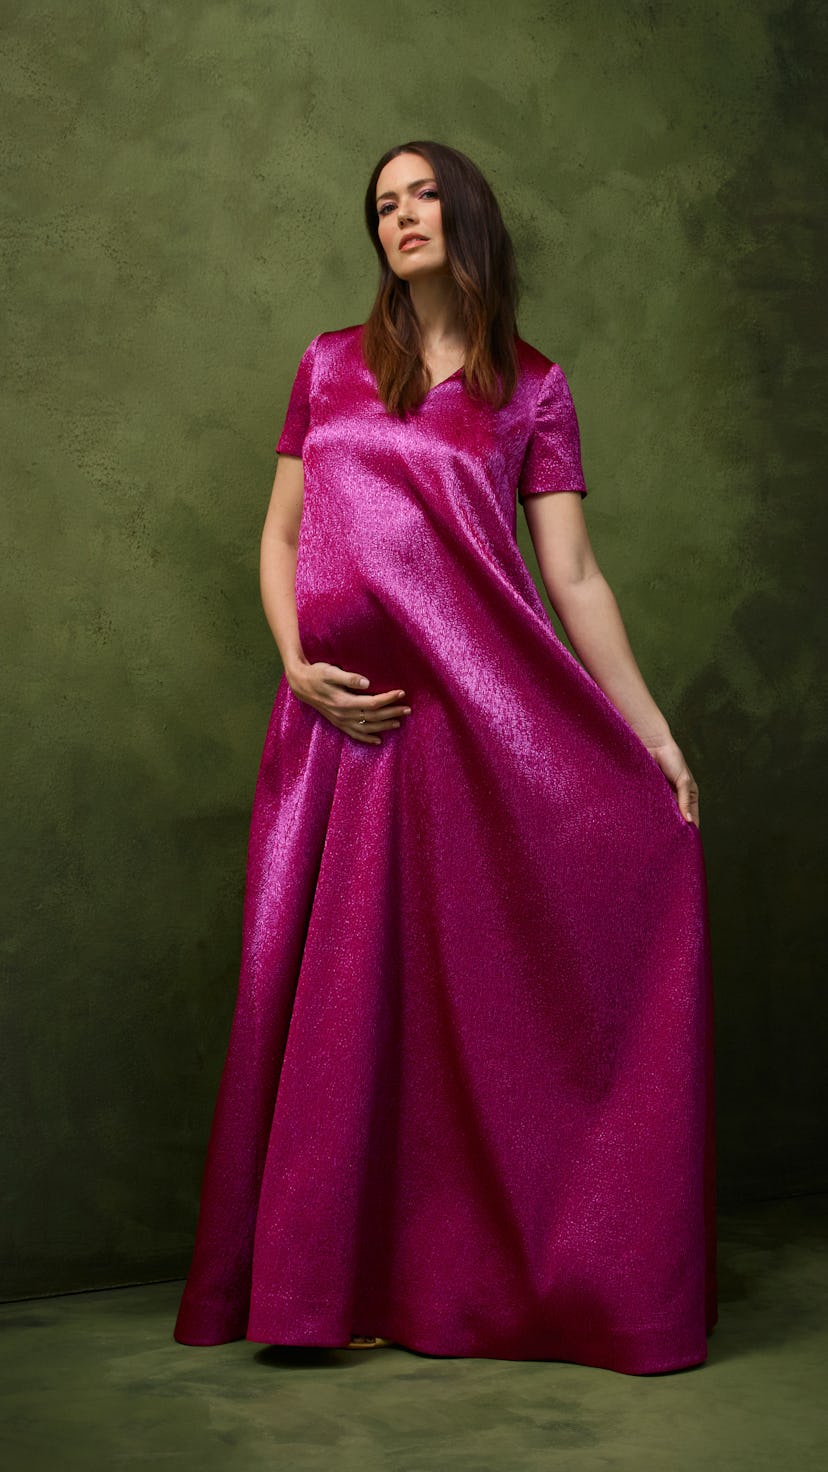 Mandy Moore wearing a long satin magenta dress while posing for her pregnancy photos